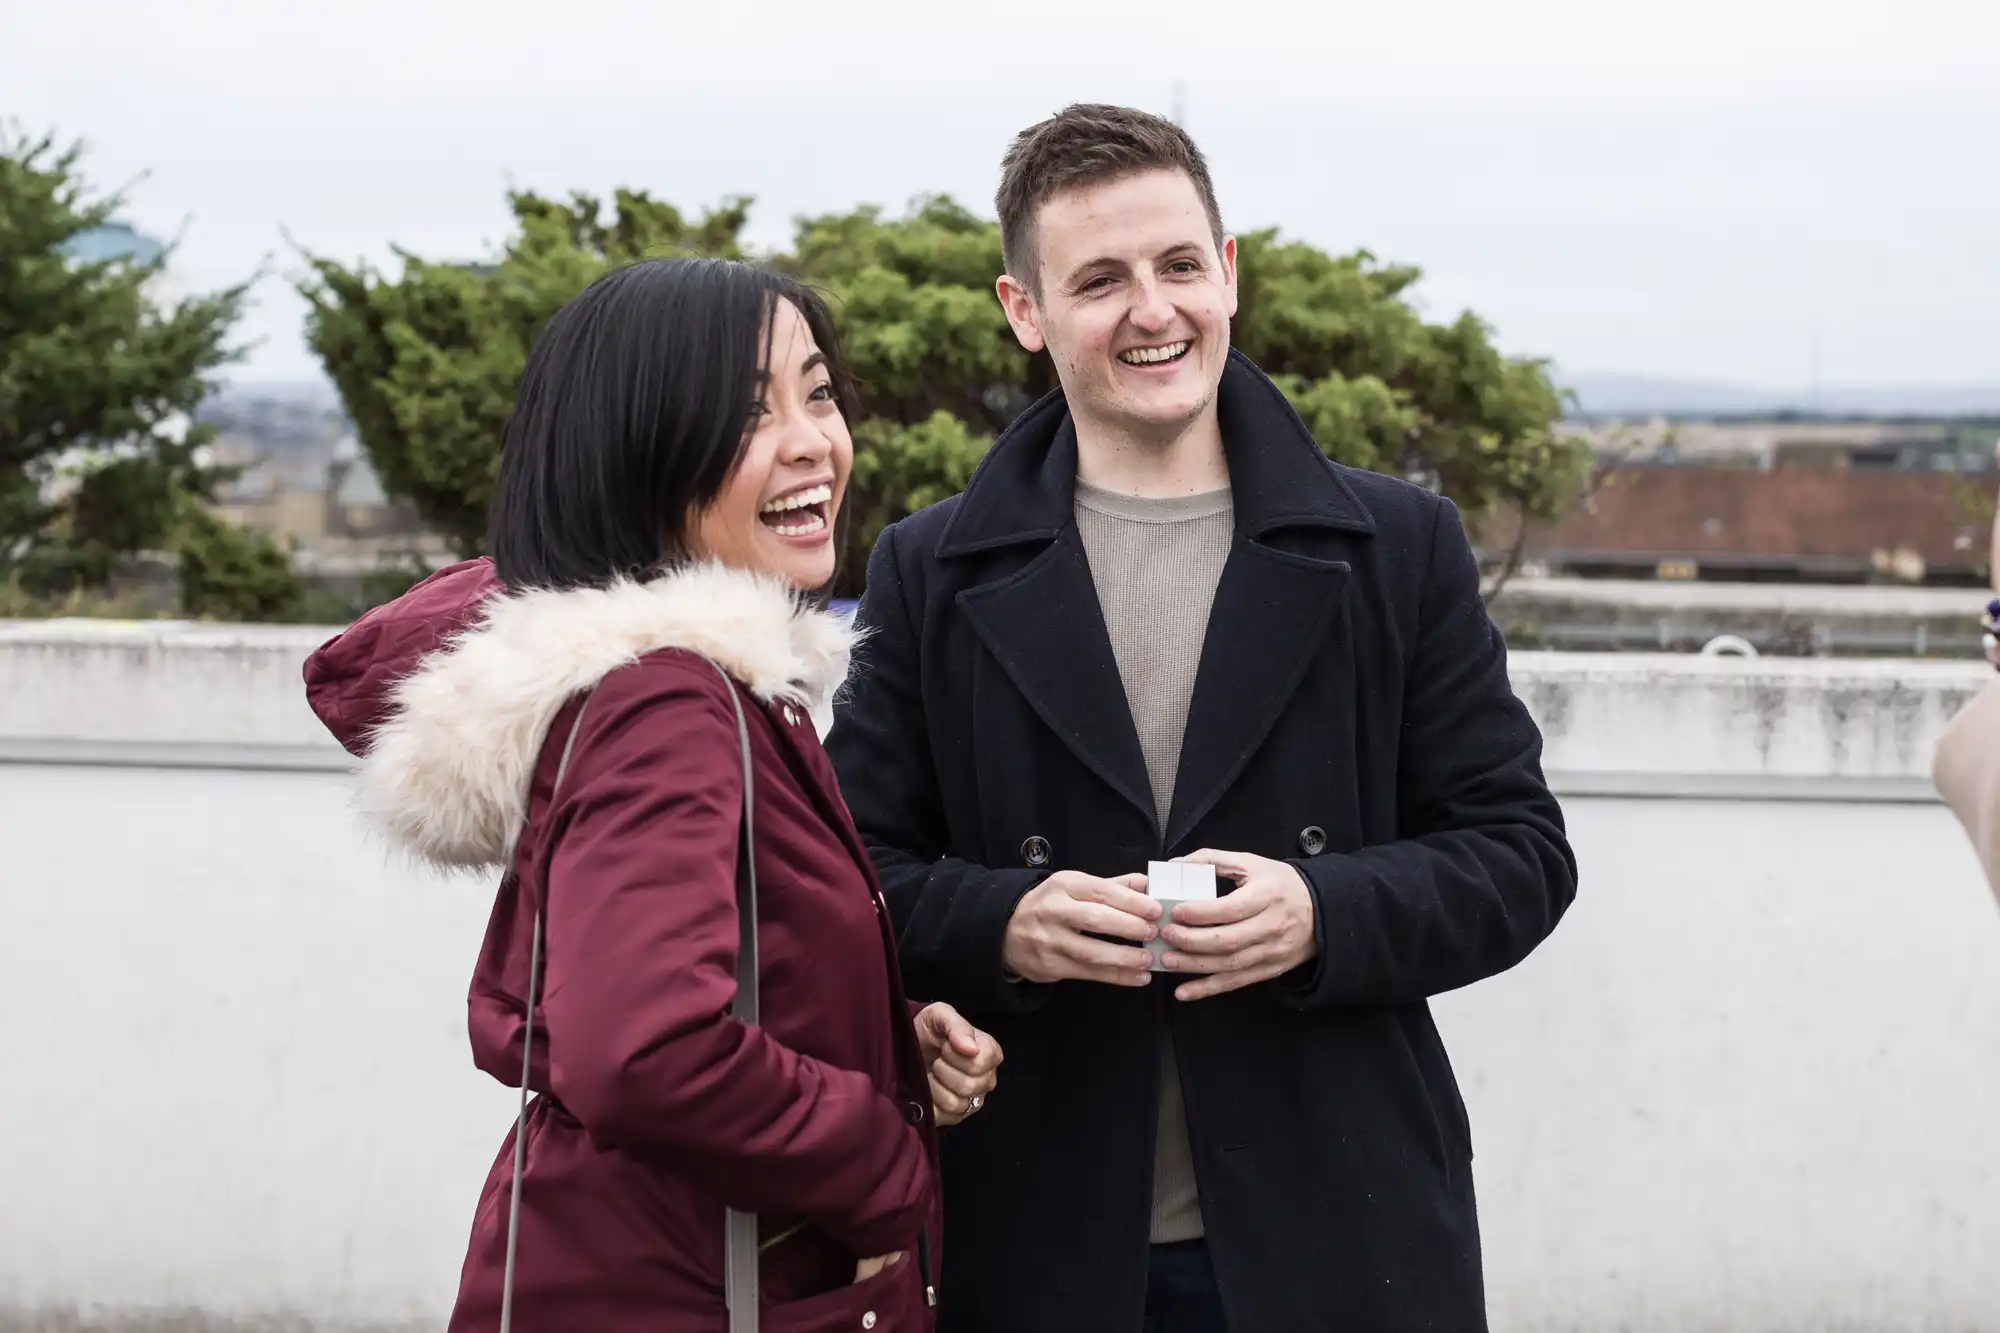 Two people smiling and talking outdoors, a woman in a red jacket and a man in a dark coat, holding coffee cups.